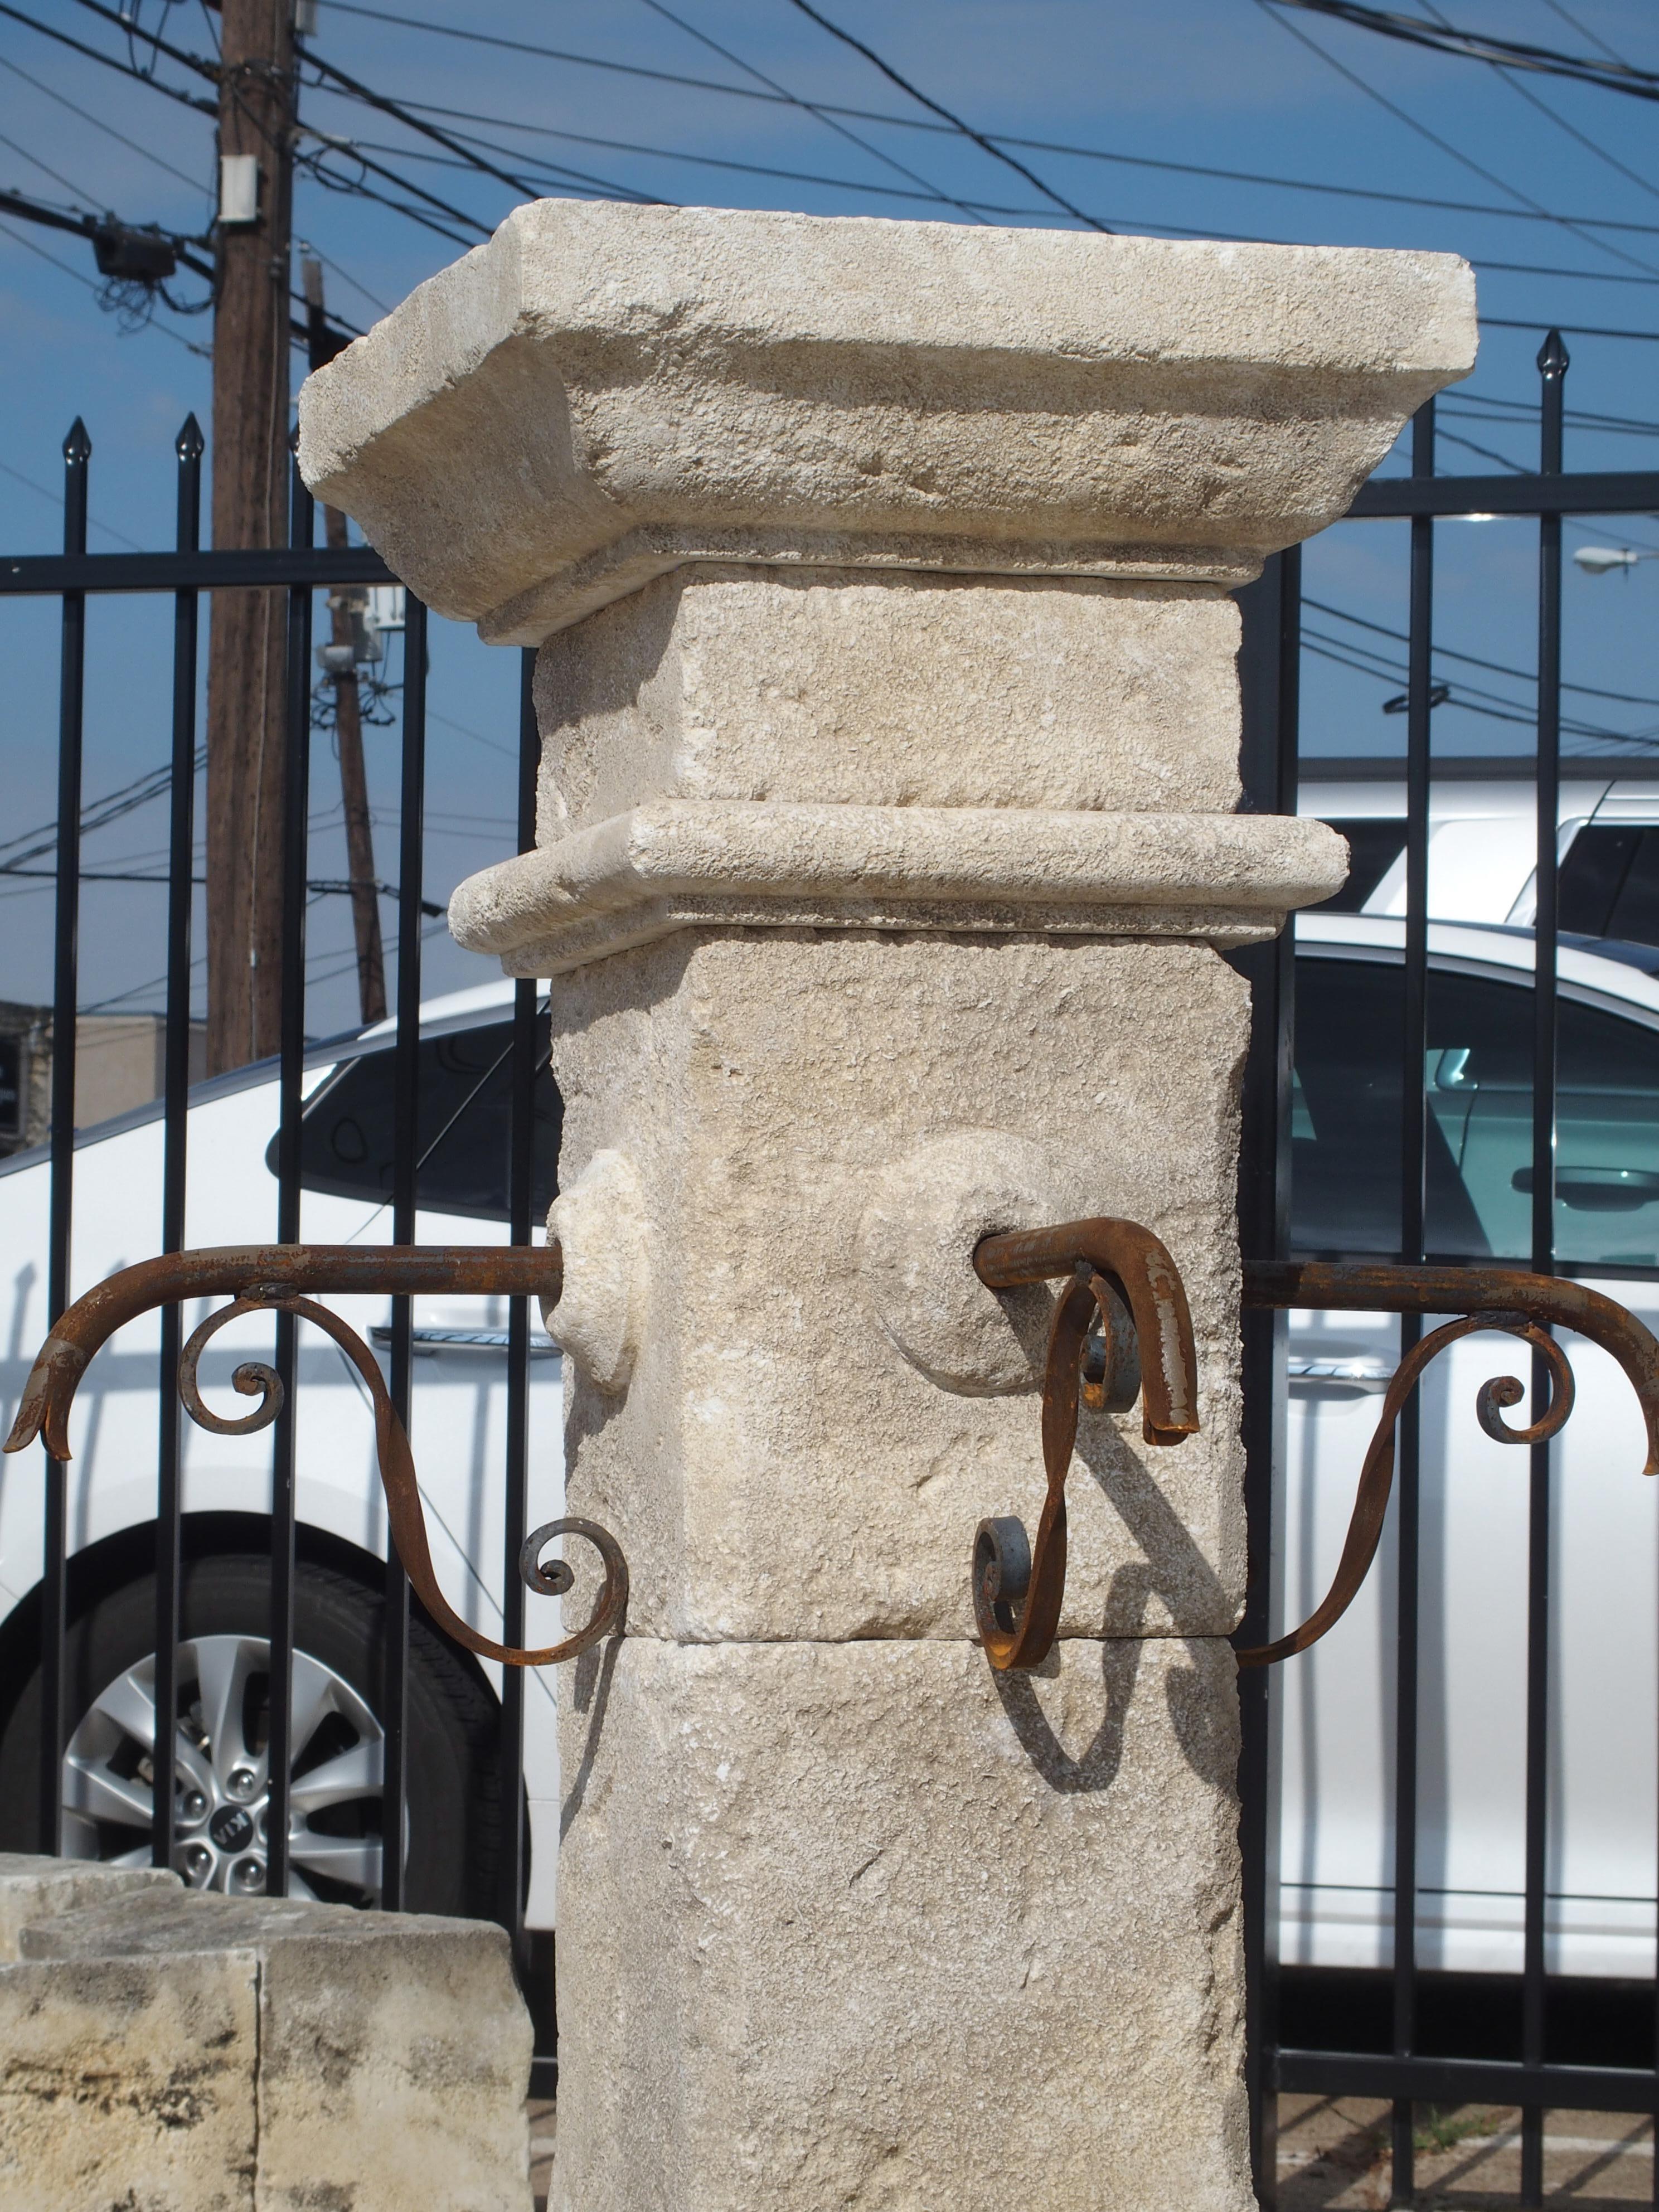 This hand carved limestone, center fountain from France is octagonal and has well shaped basin stones instead of flat sides. It has four iron S-scroll spouts that adorn the center post, and the basin has two iron bars for holding flower pots or